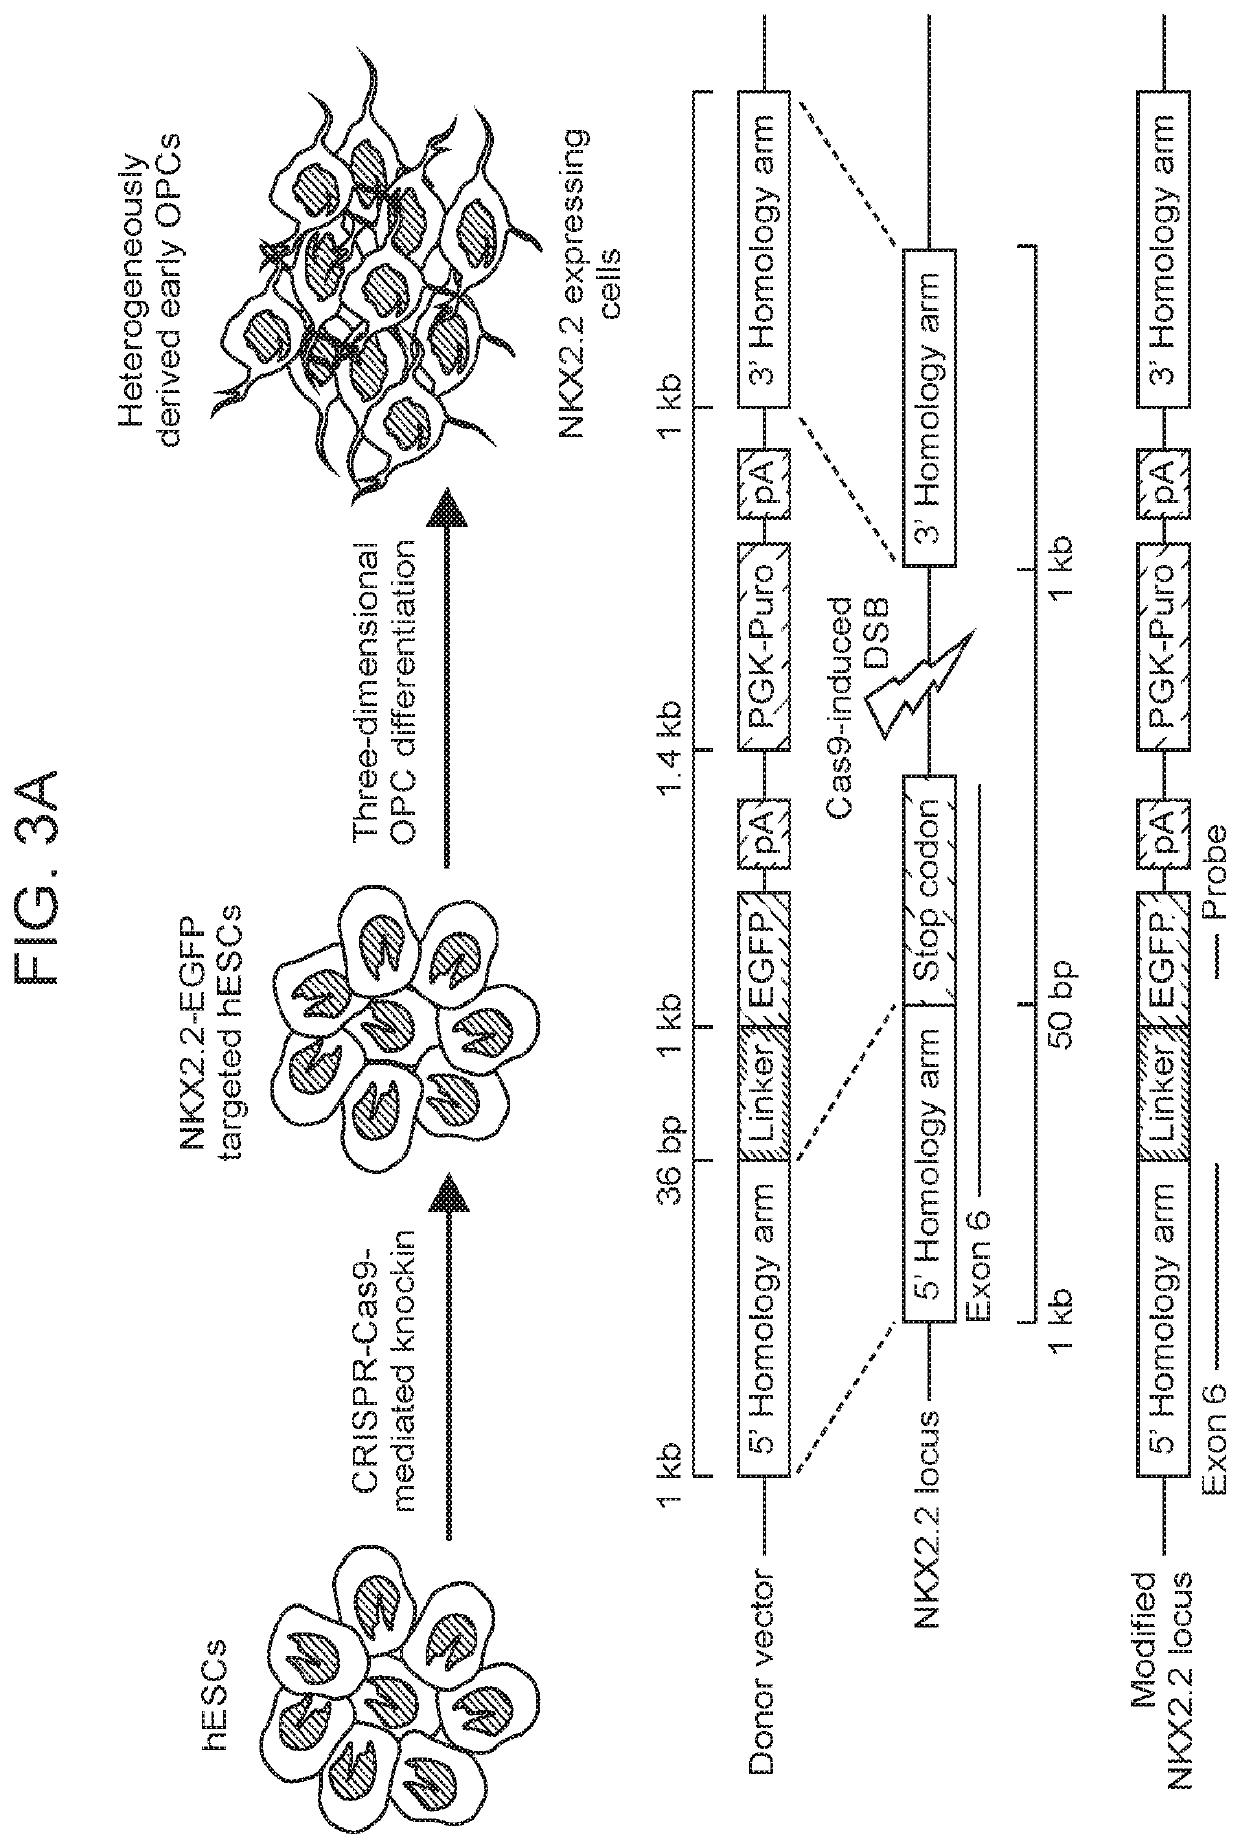 Compositions and methods for generating oligodendrocyte precursors